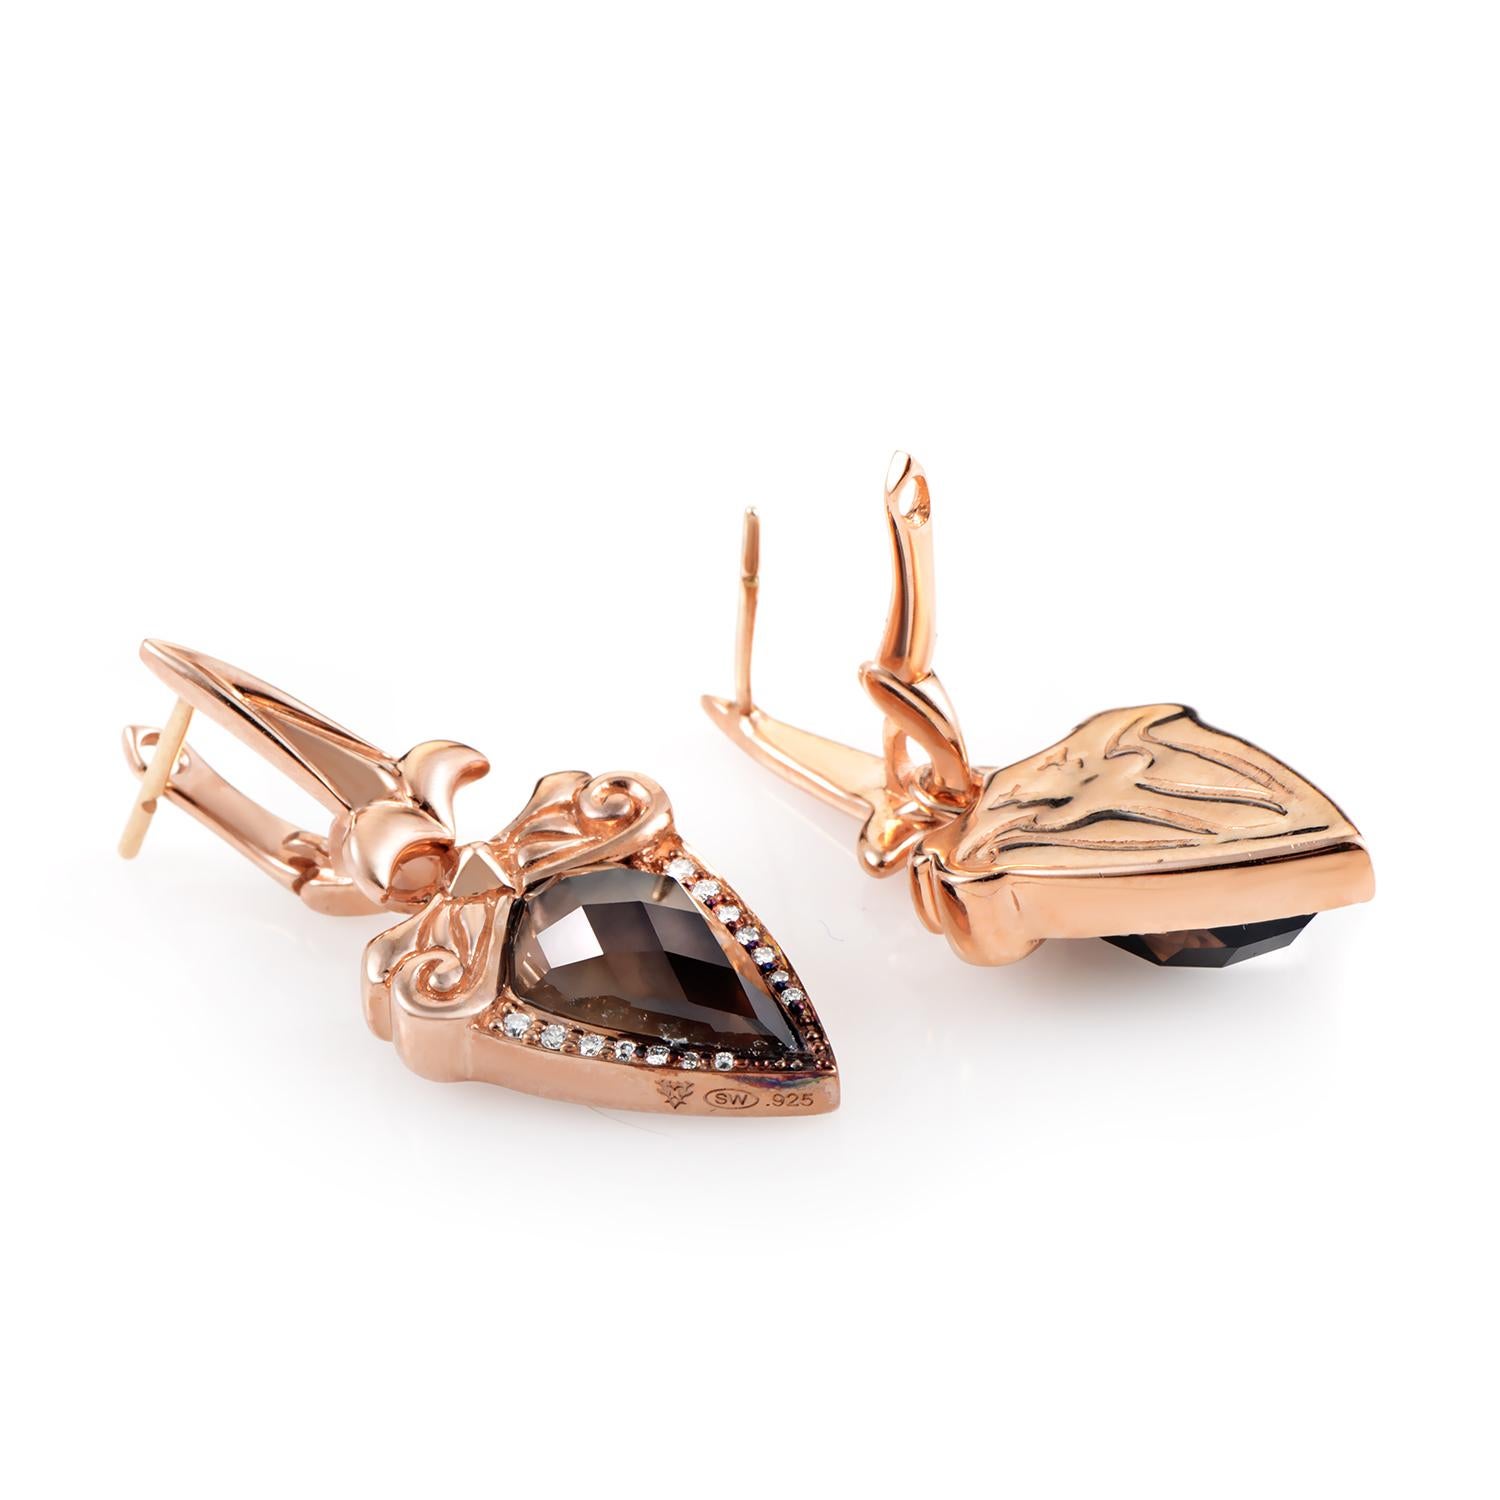 In keeping with the brands long-lasting tradition of creating exceptional designs with ornate décor, these majestic earrings from Stephen Webster are made of sterling silver and plated with rose gold while adorned with pleasing smoky quartz,